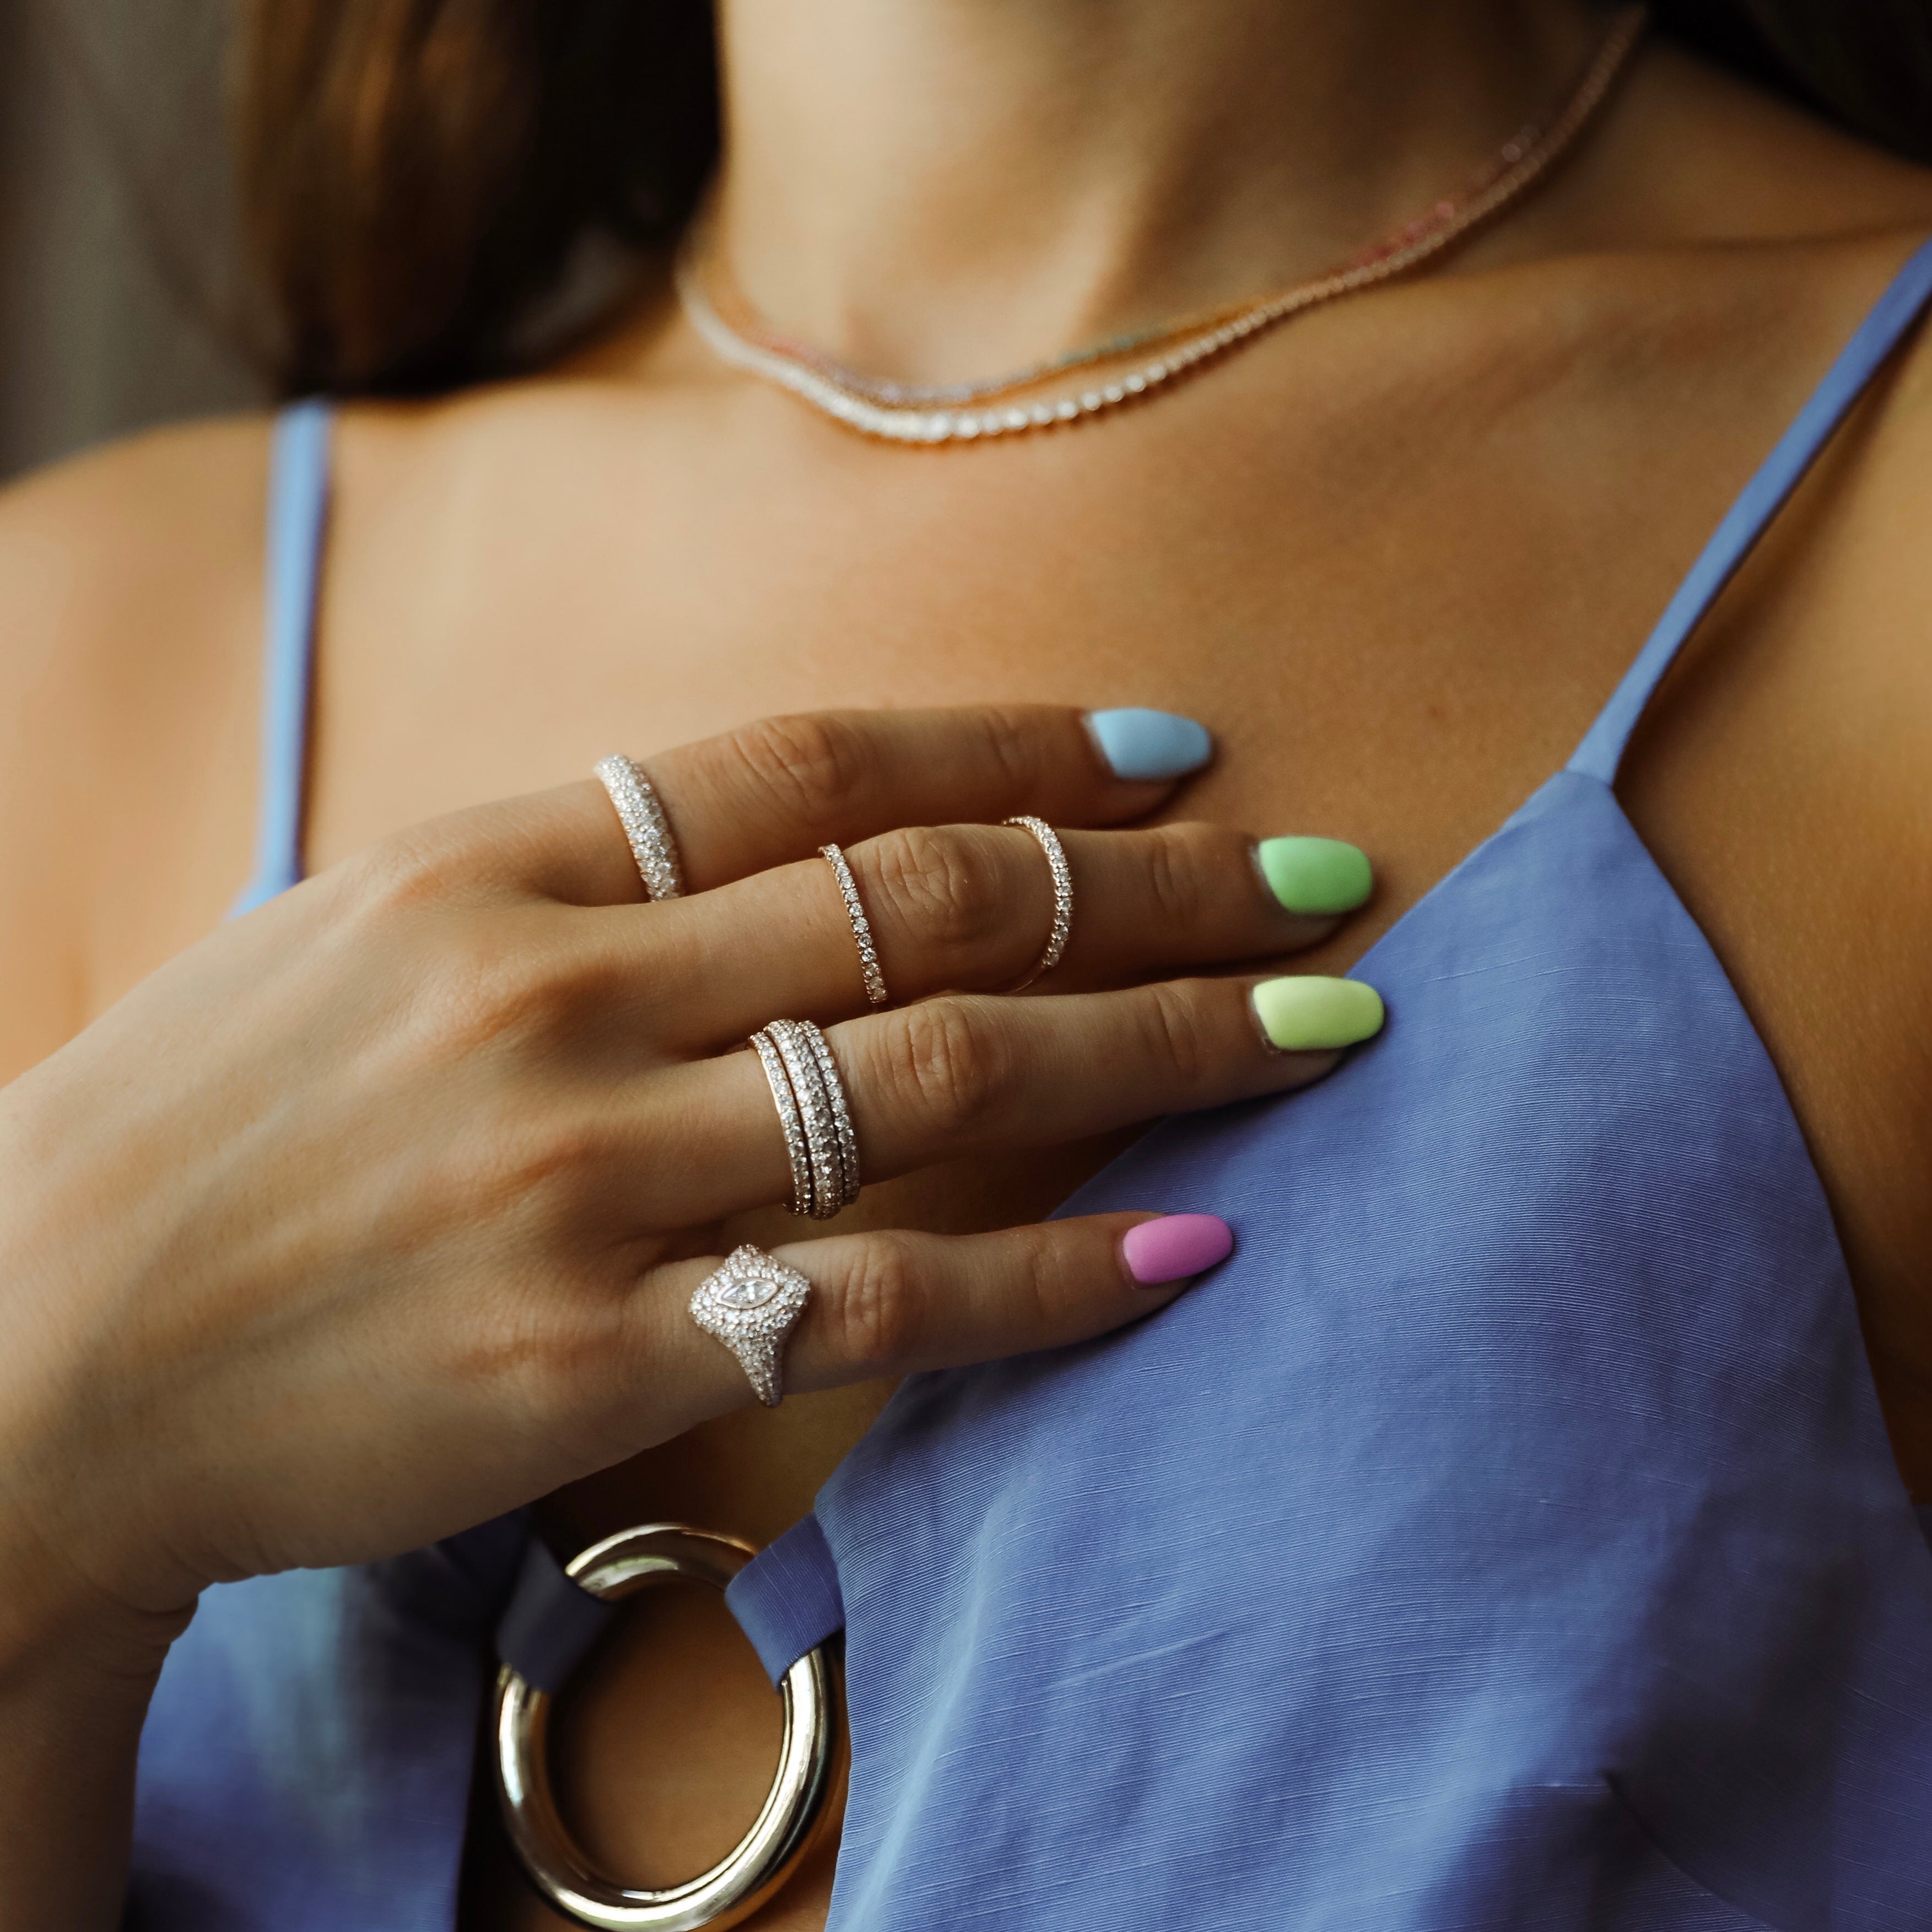 Marquise Bling Pinky Ring shown with the Diamond Orbit Ring, Olympia Ring, and Dome Ring